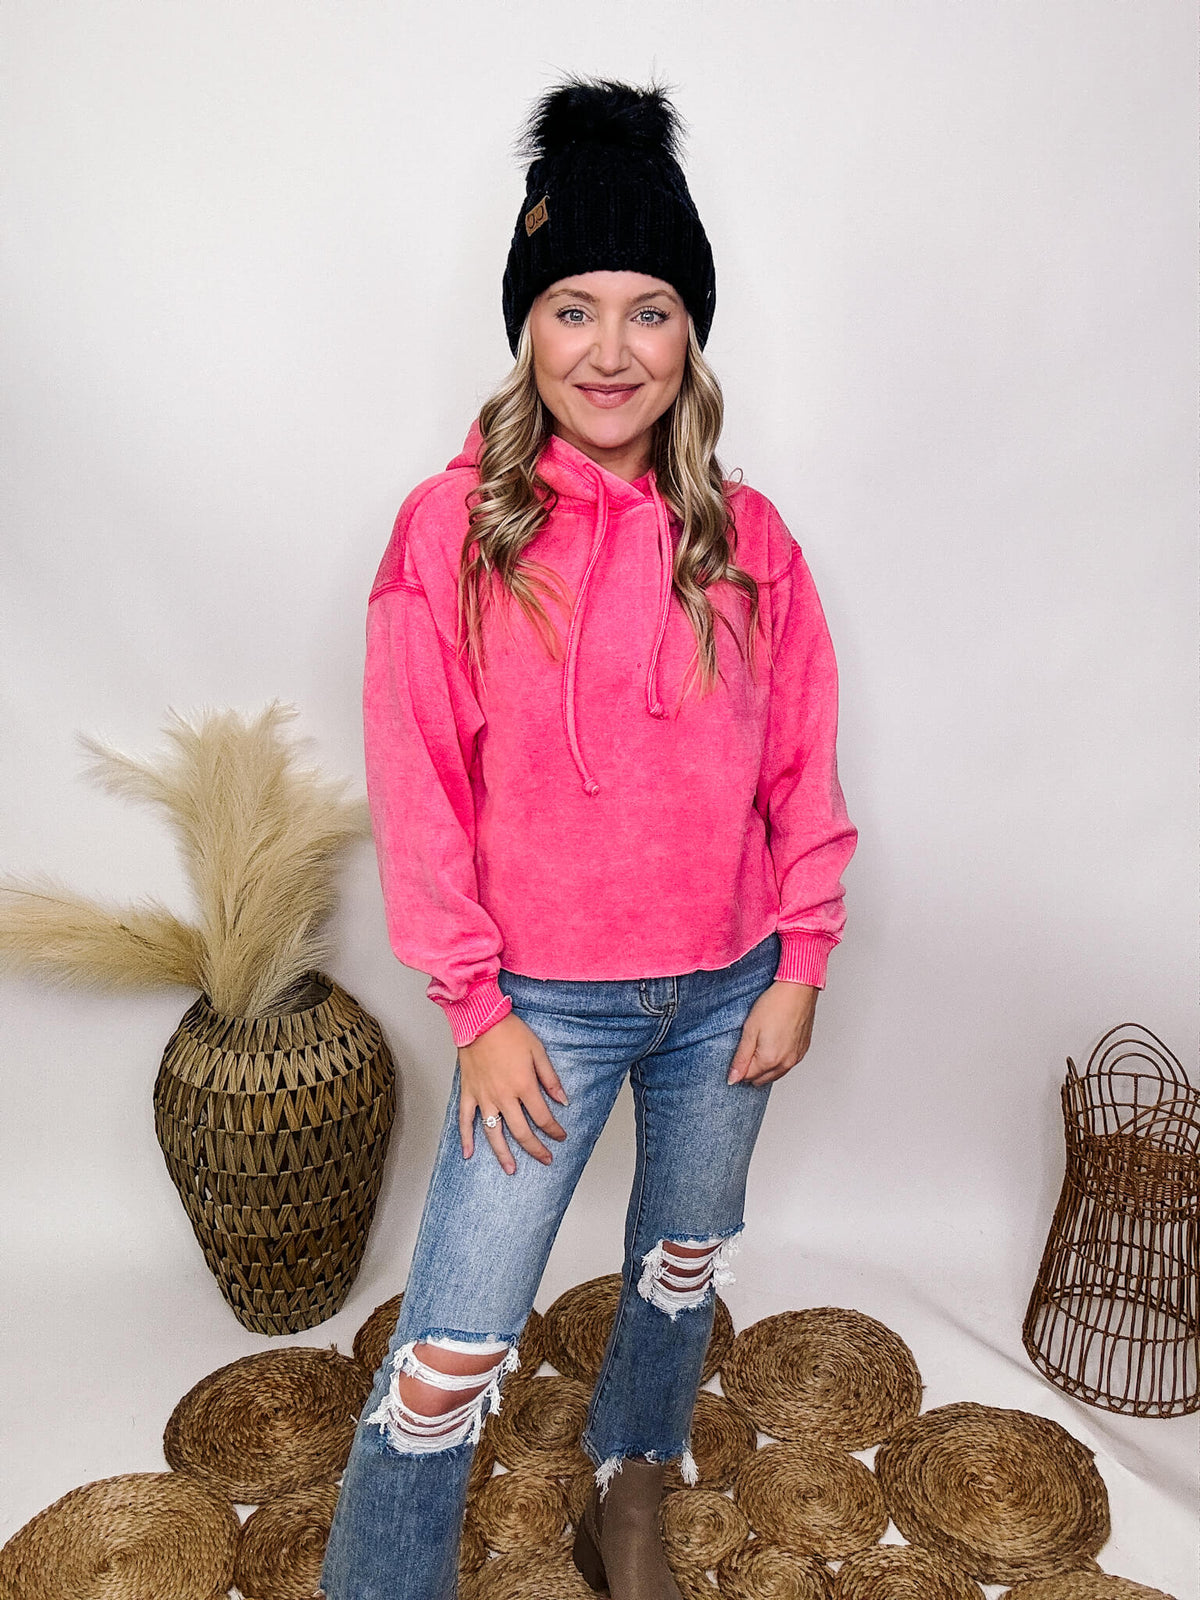 Zenana Fuchsia Hot Pink Acid Washed Long Sleeve Pullover Hoodie Cropped Length Raw Bottom Hem Fleece Lined Relaxed Fit 60% Cotton, 40% Polyester ** Each item will be unique due to the acid wash.